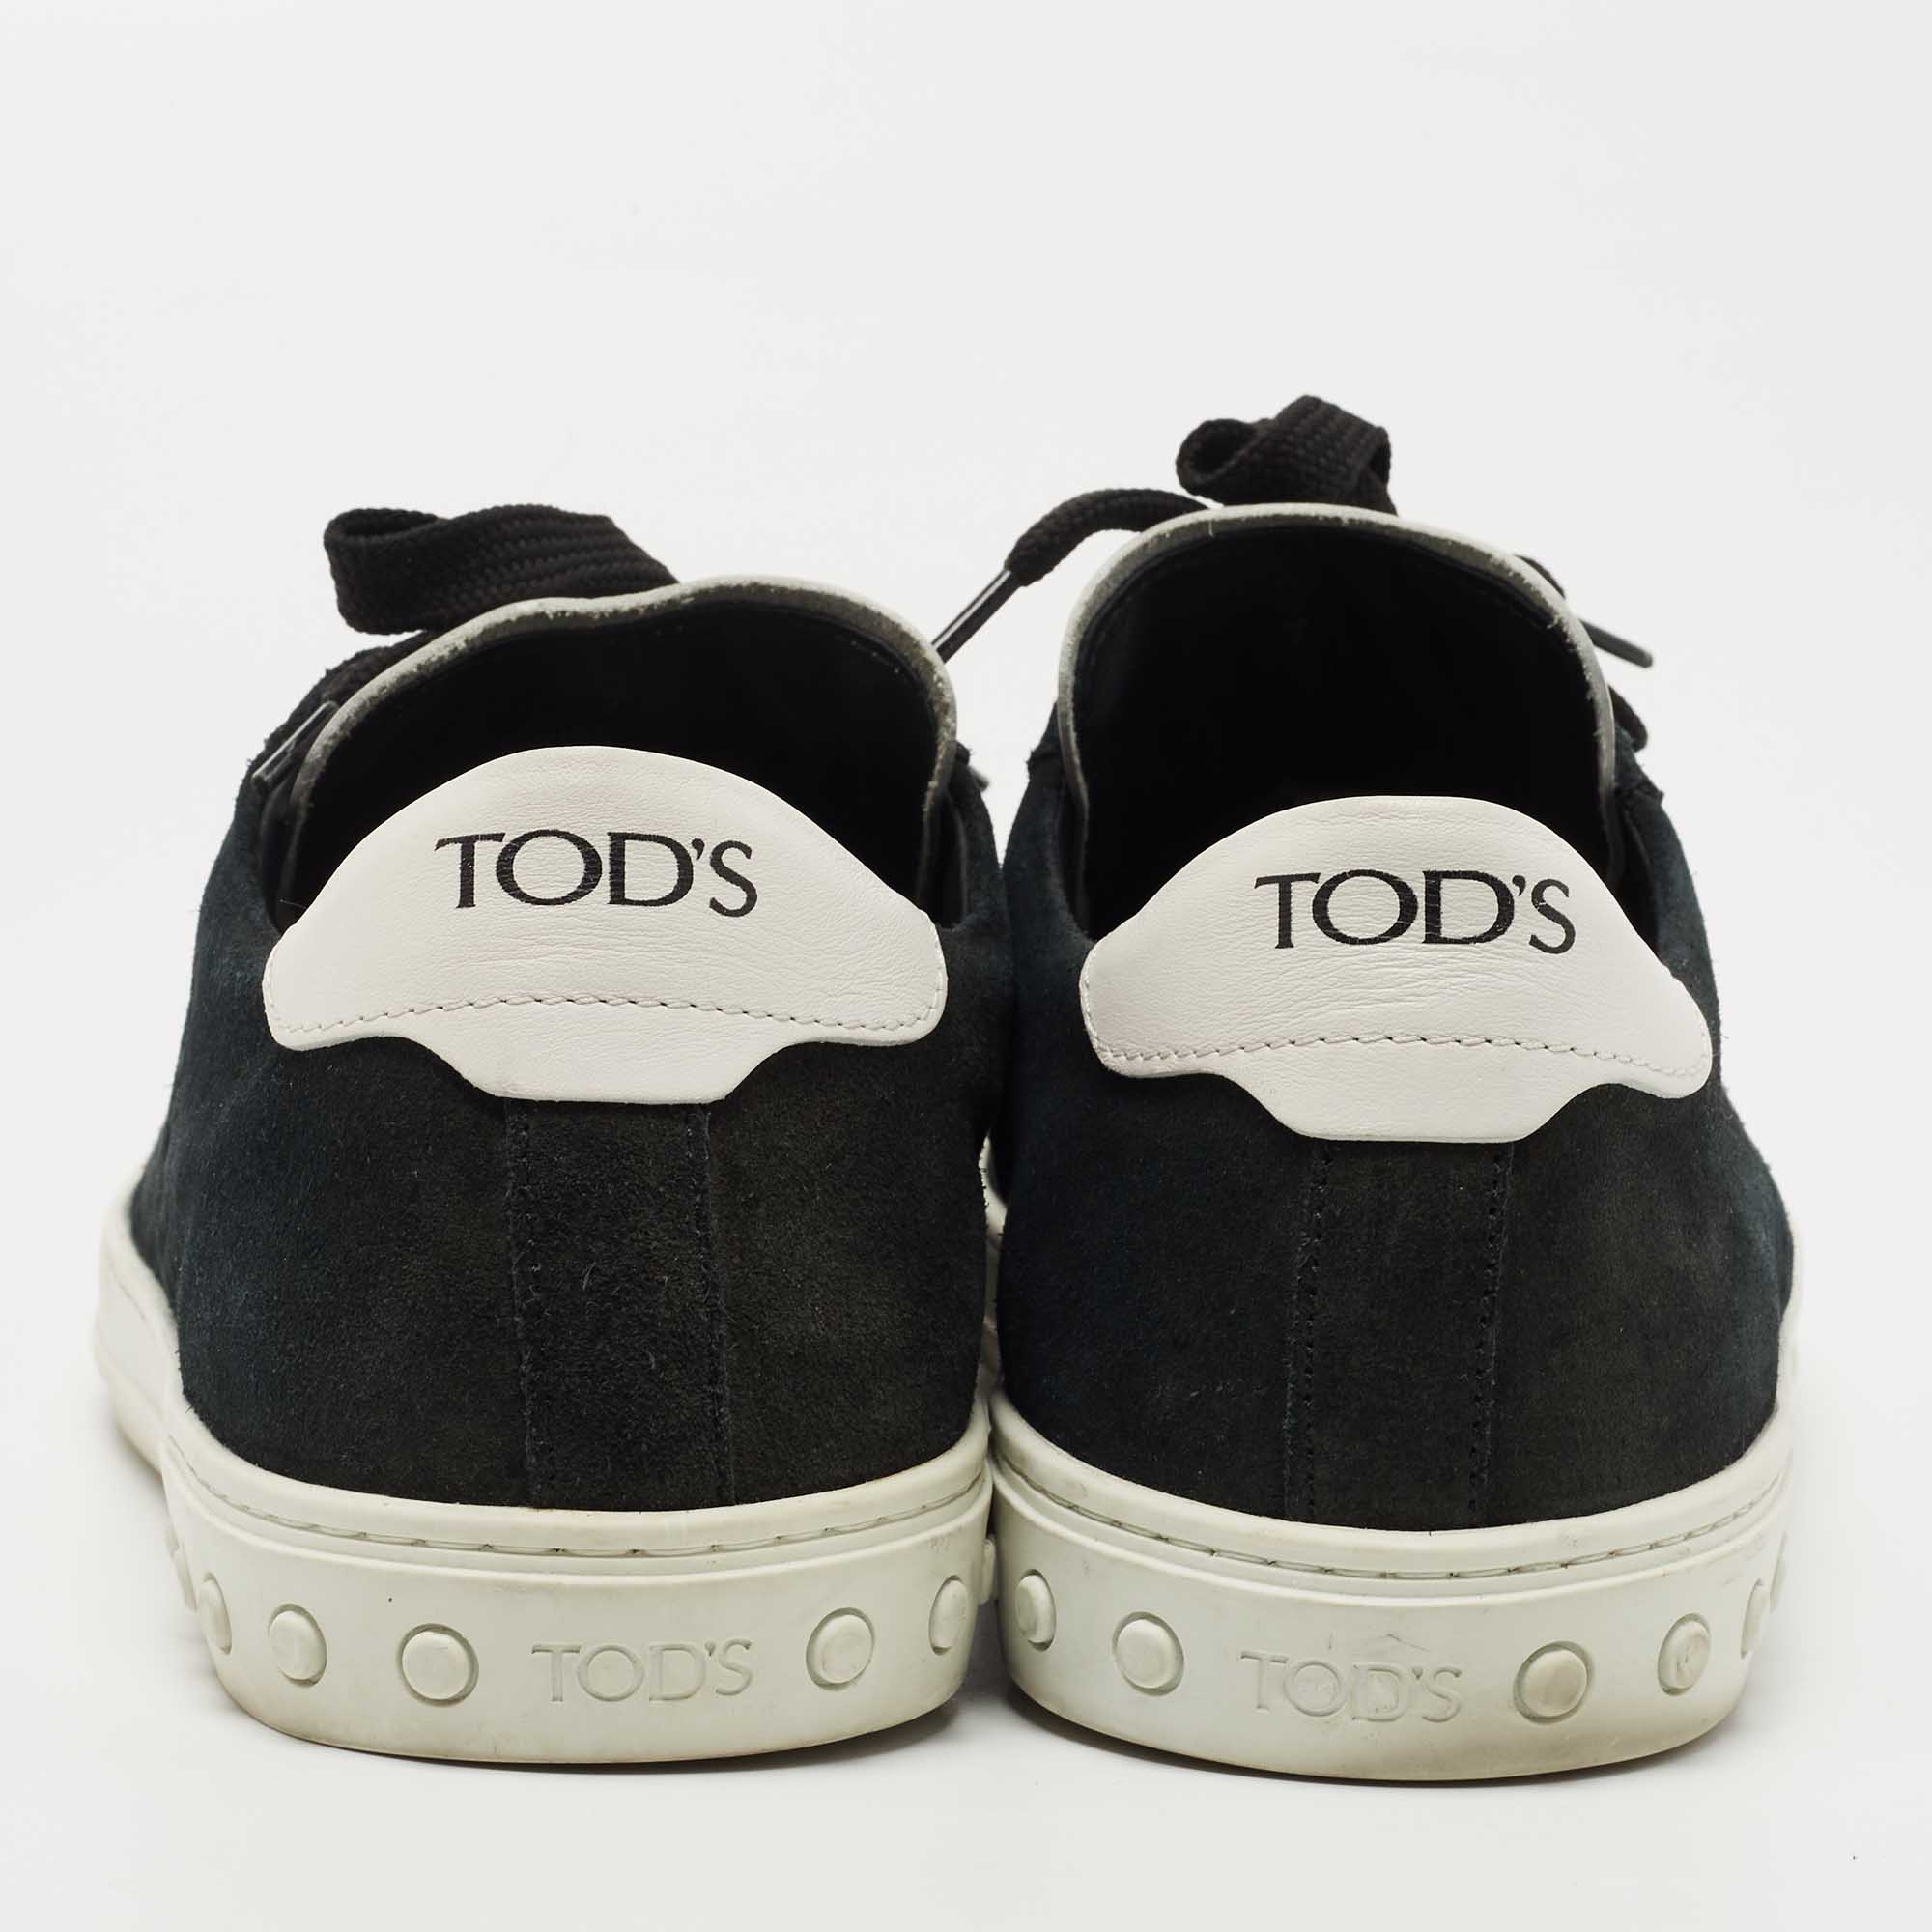 Tods Navy Blue/White Suede And Leather Low Top Sneakers Size 41.5